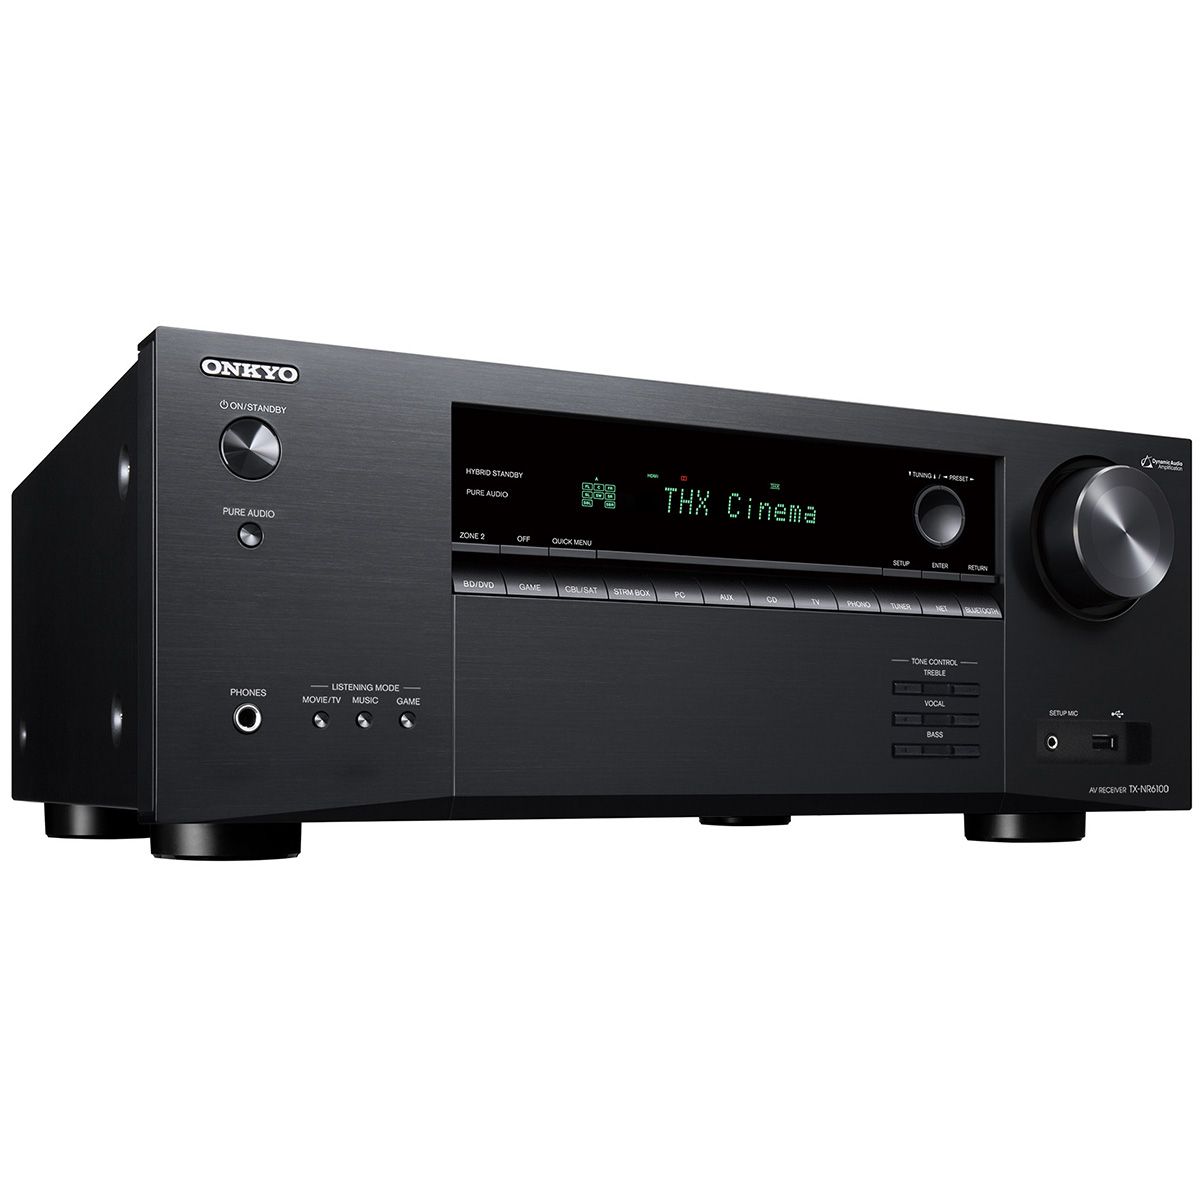 Onkyo TX-NR6100 angled with listening modes